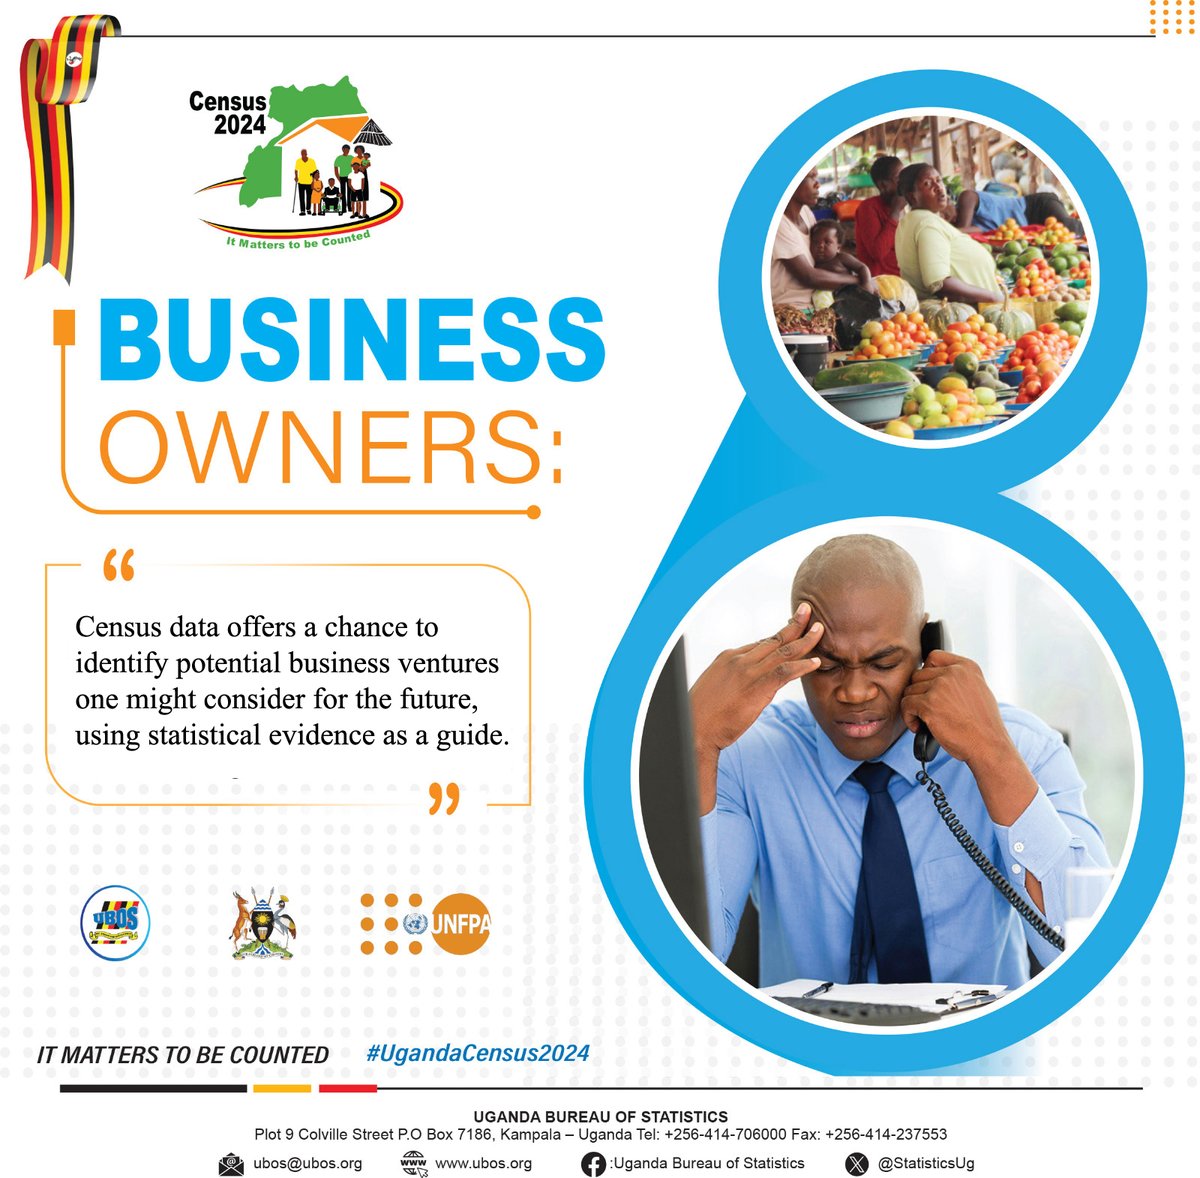 Are you a small business owner or a hopeful entrepreneur? Were you aware that valuable data collected from the current census will shape upcoming business decisions? Participate in the ongoing Census to discover potential business opportunities for the future. @UNFPAUganda,